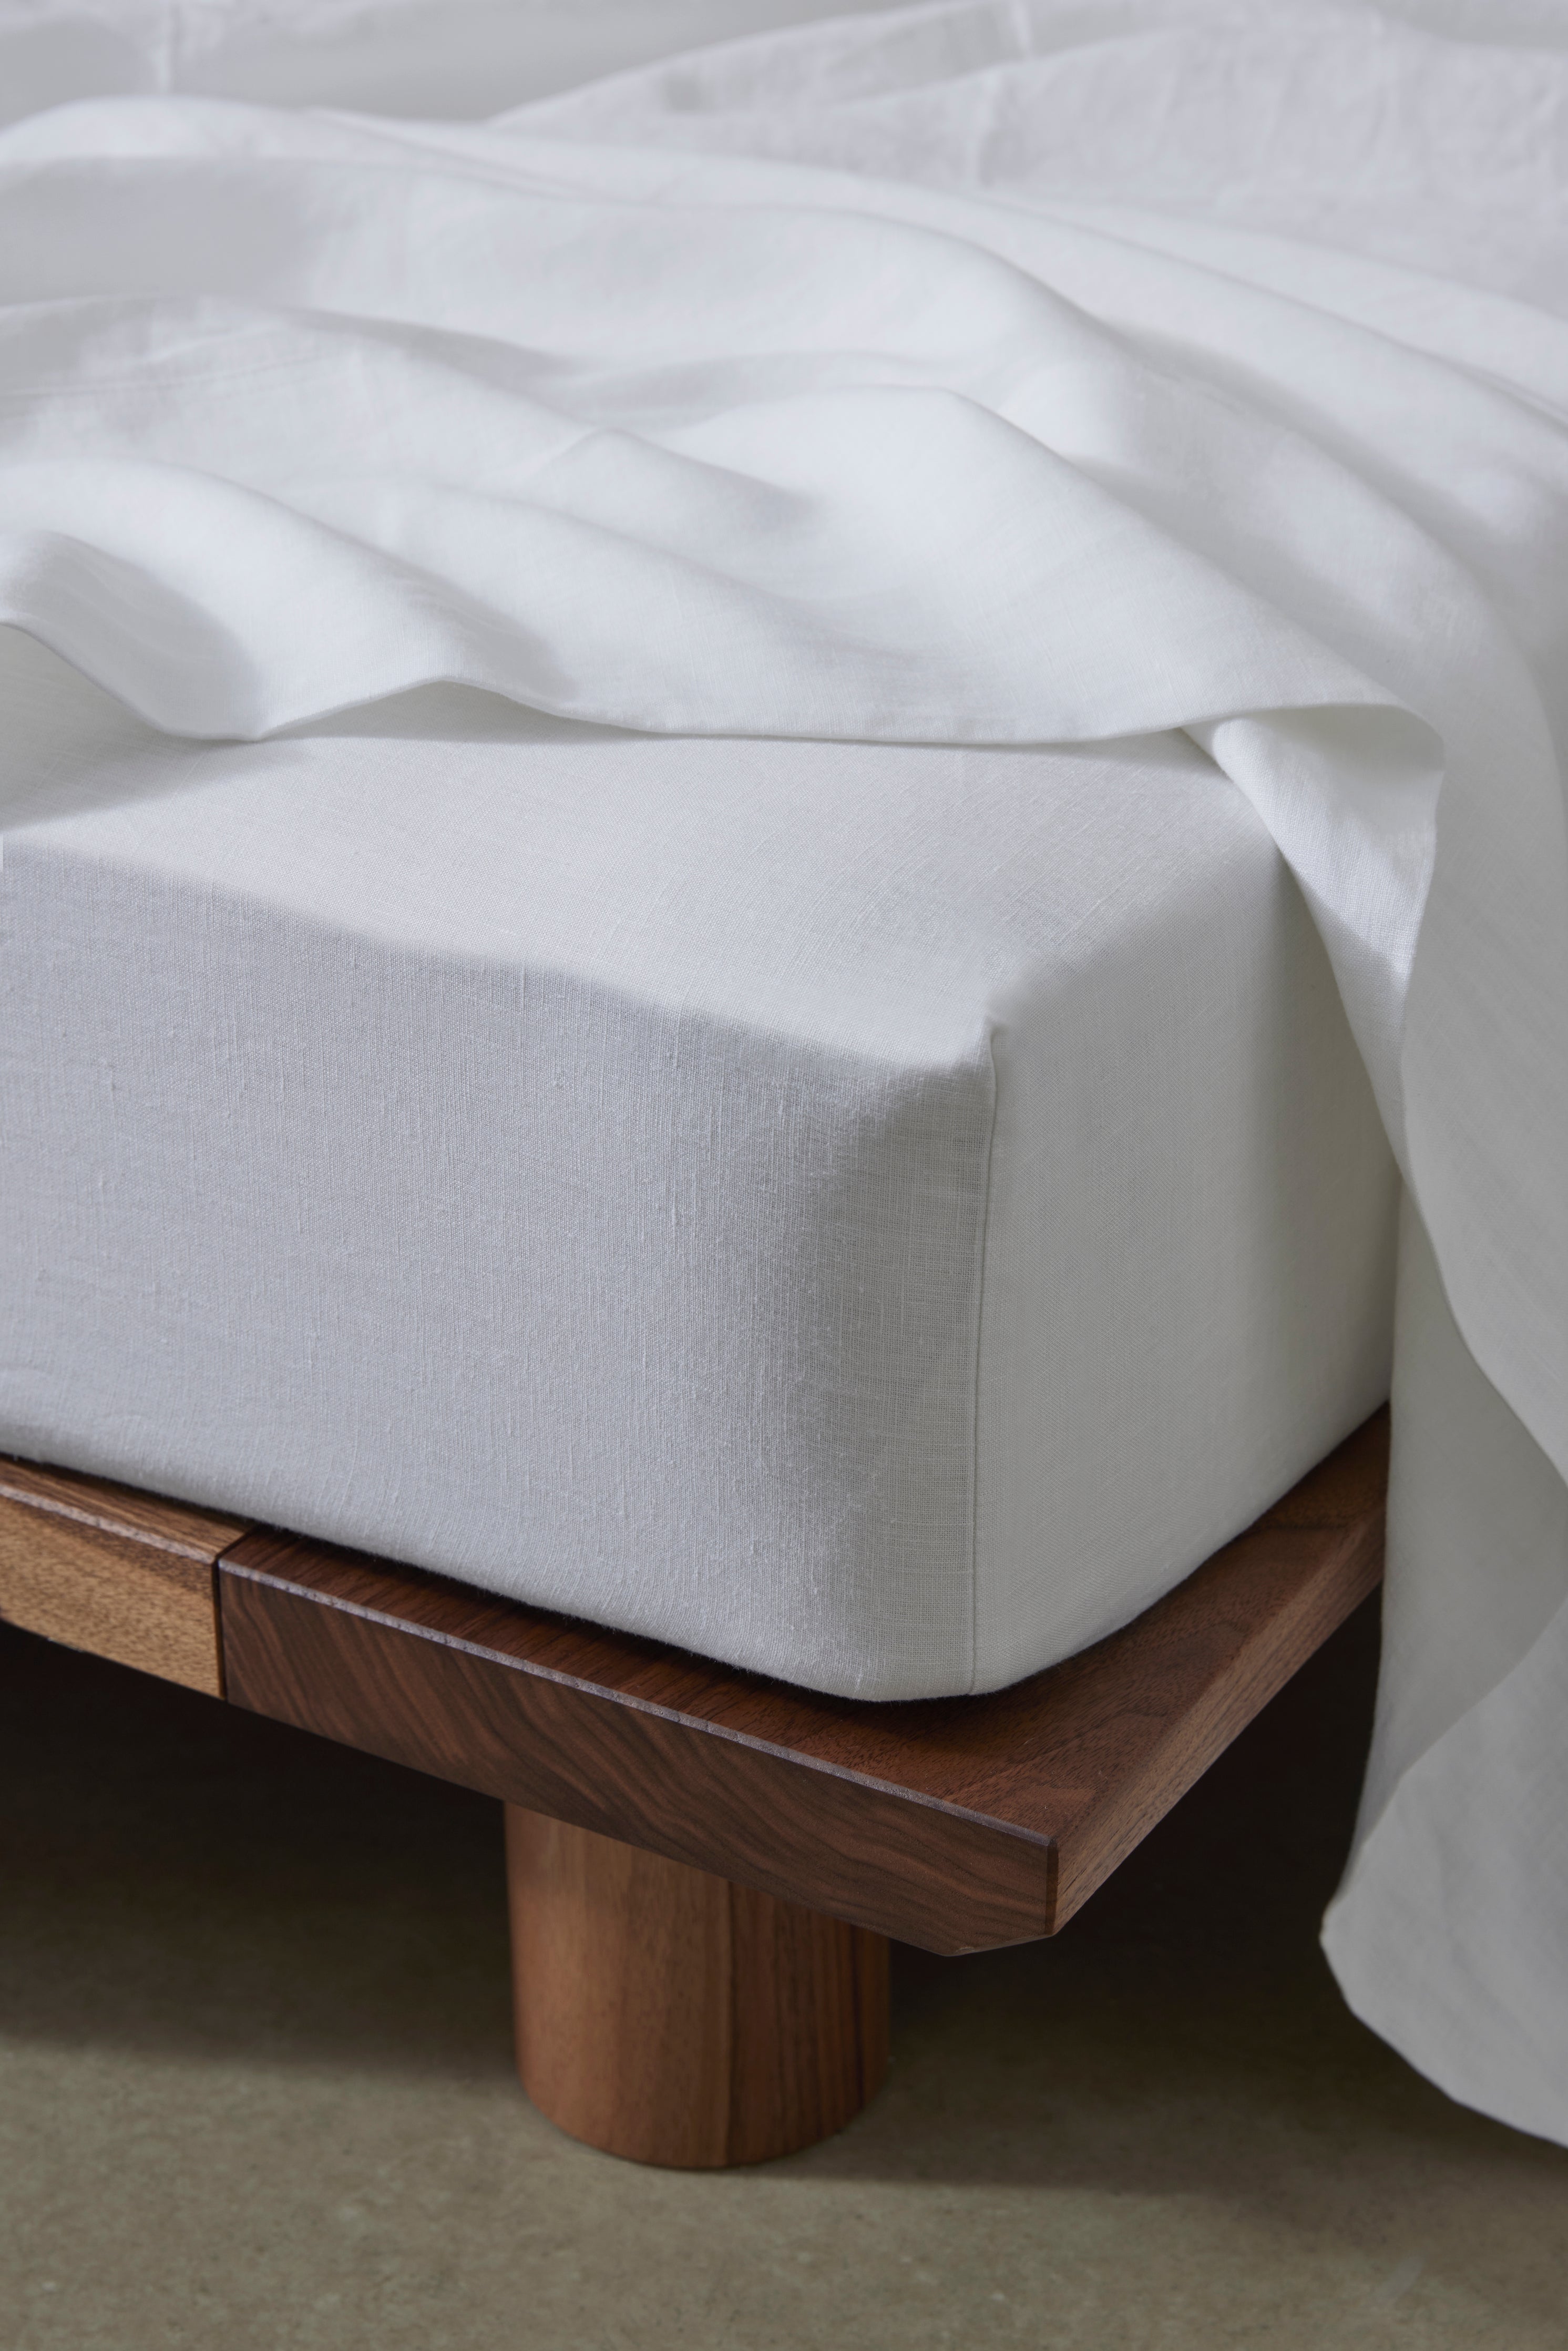 Cover your mattress with soft, luxurious linen with the Ravello Fitted Sheet. The White colourway is a classic, essential shade that will match with any look and create timeless styles.